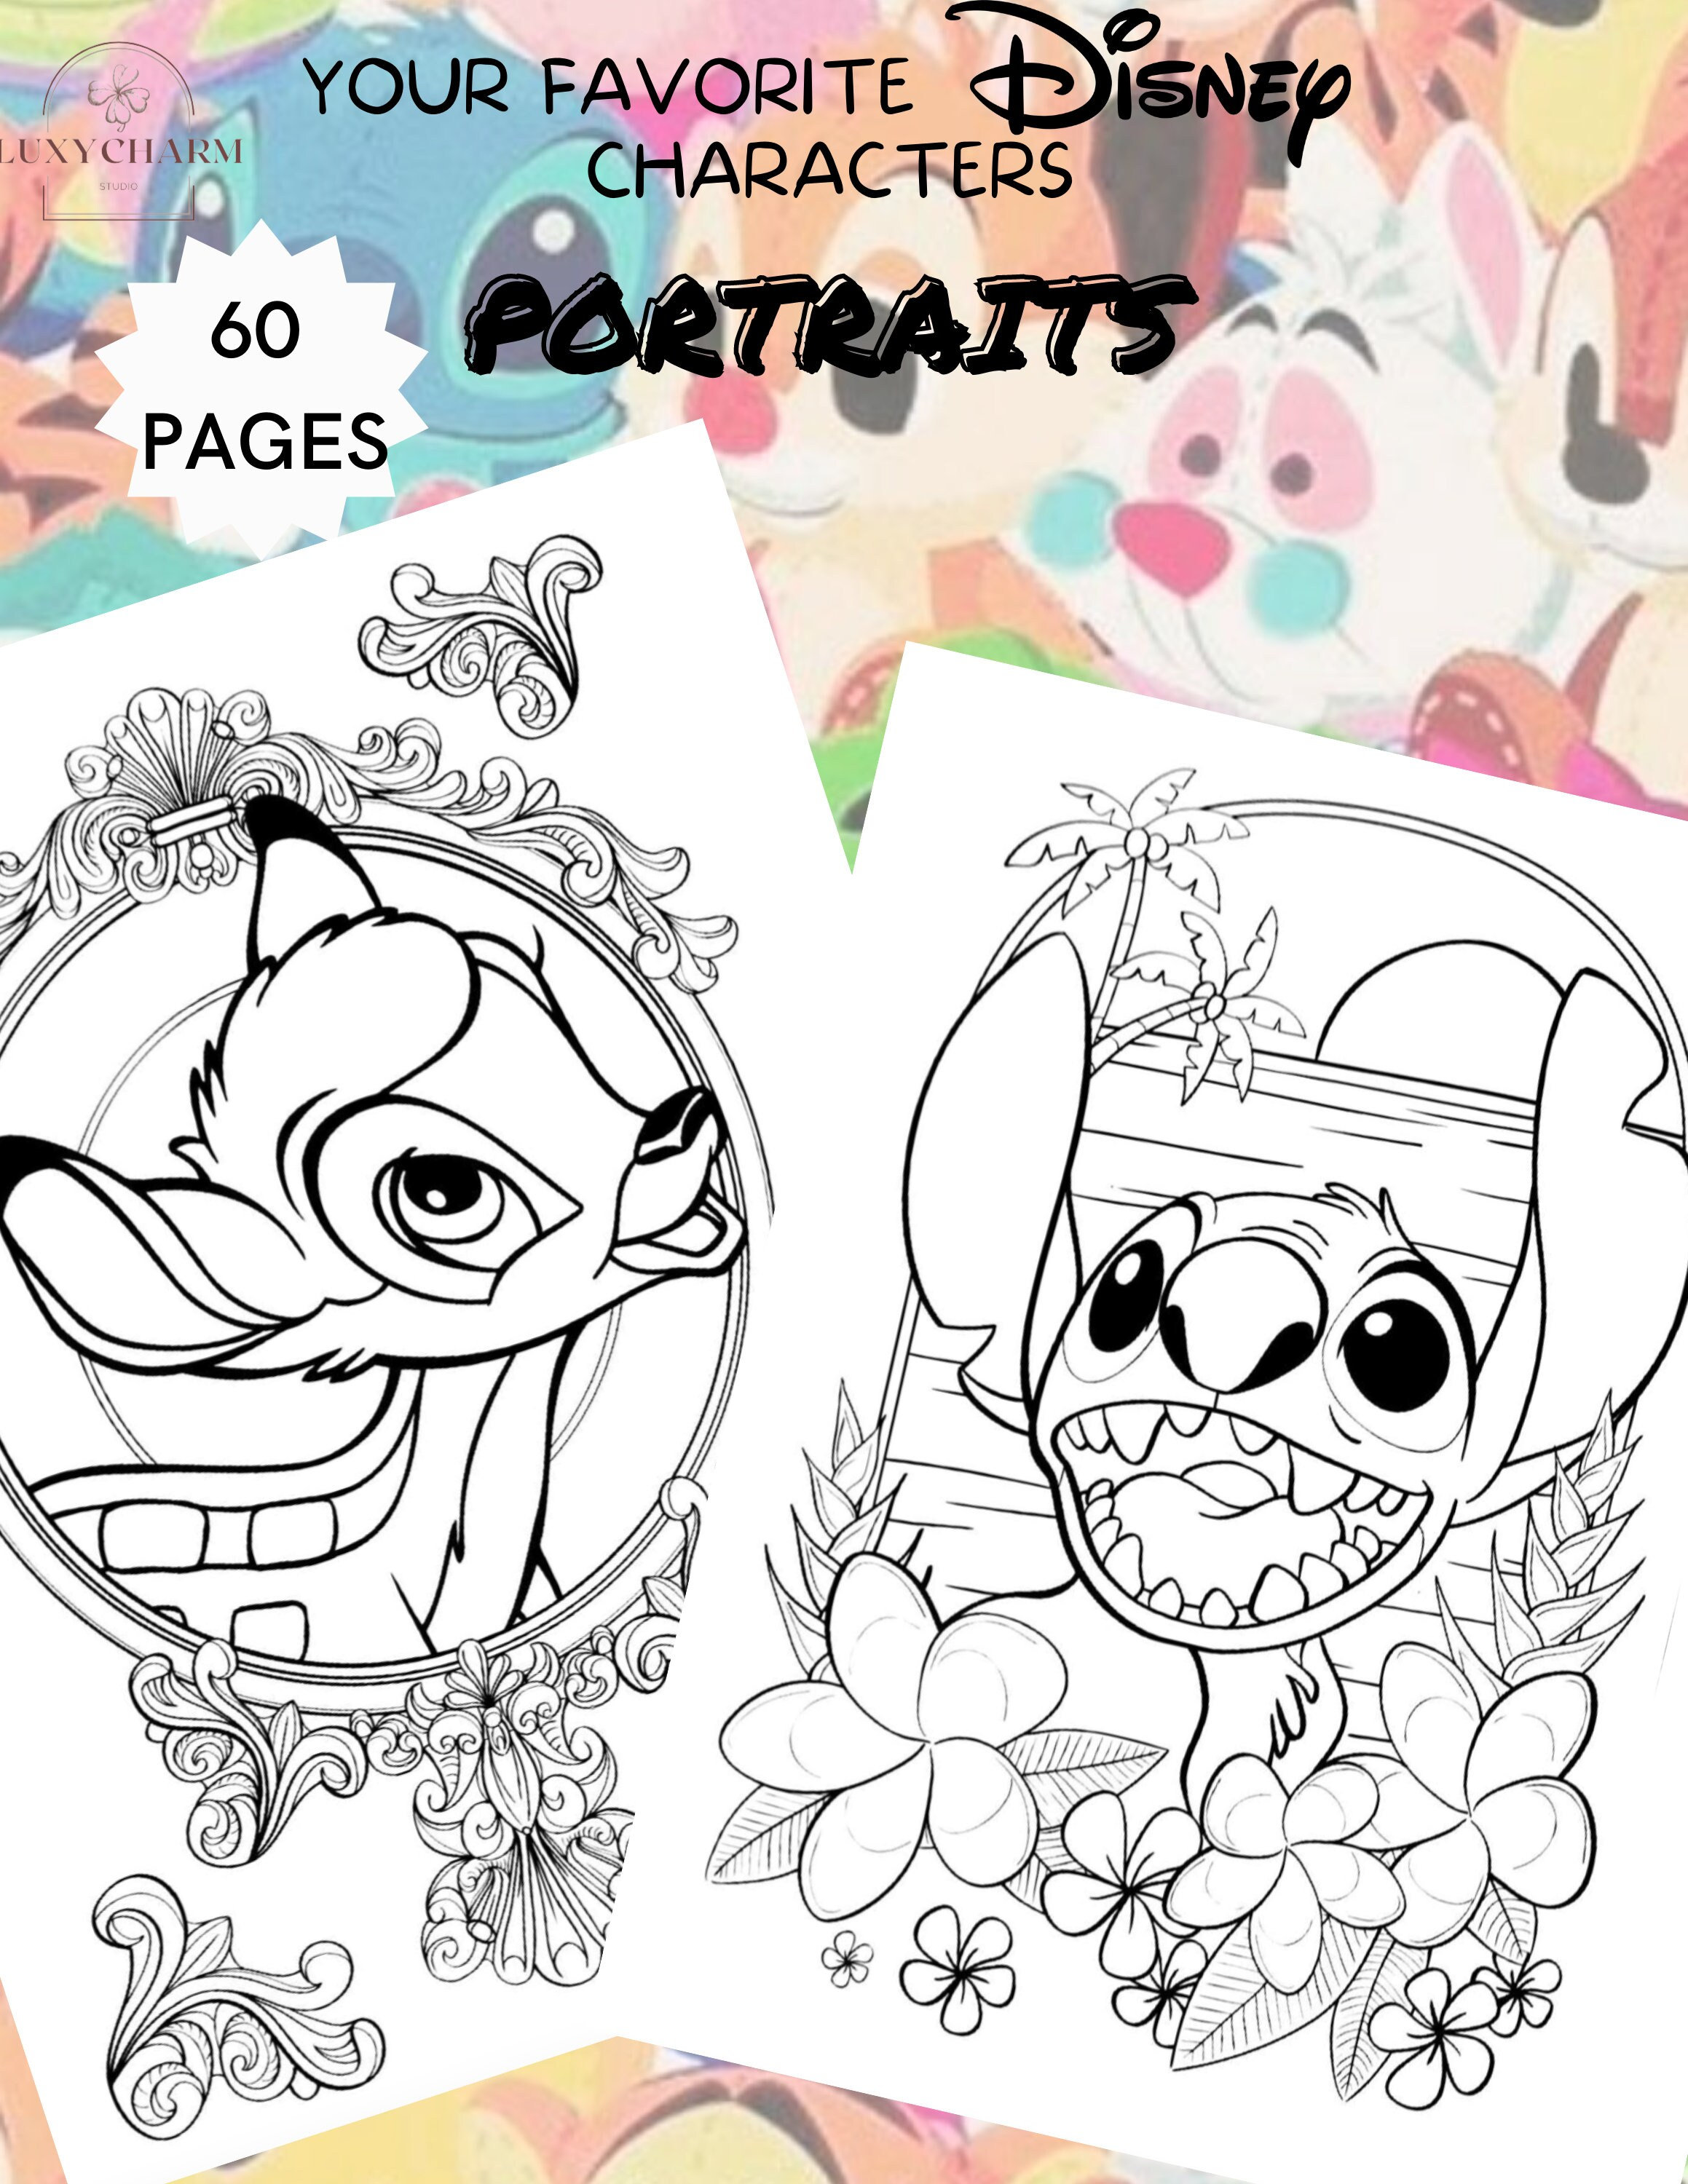 Pages portraits of your favorite characters coloring book pilation